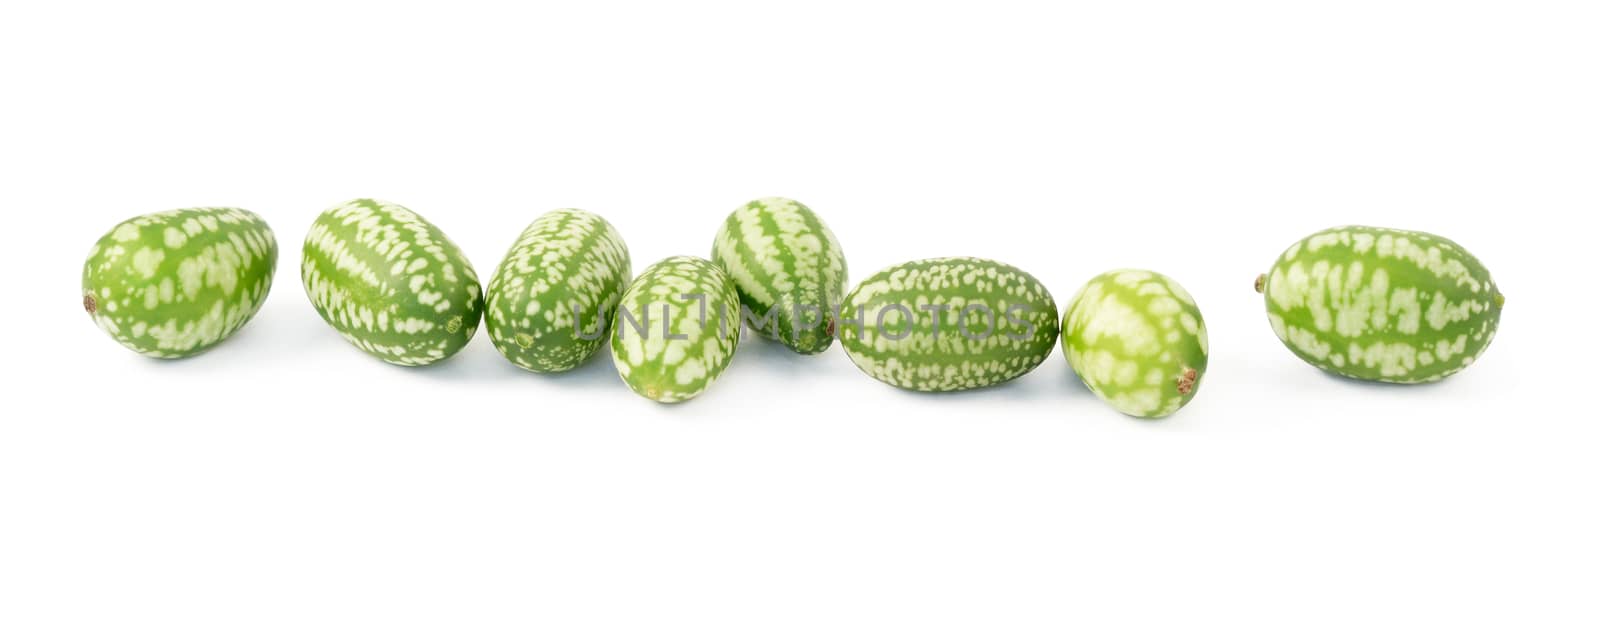 Row of eight cucamelons, Mexican sour gherkin, pepquino, or mouse melon, isolated on a white background